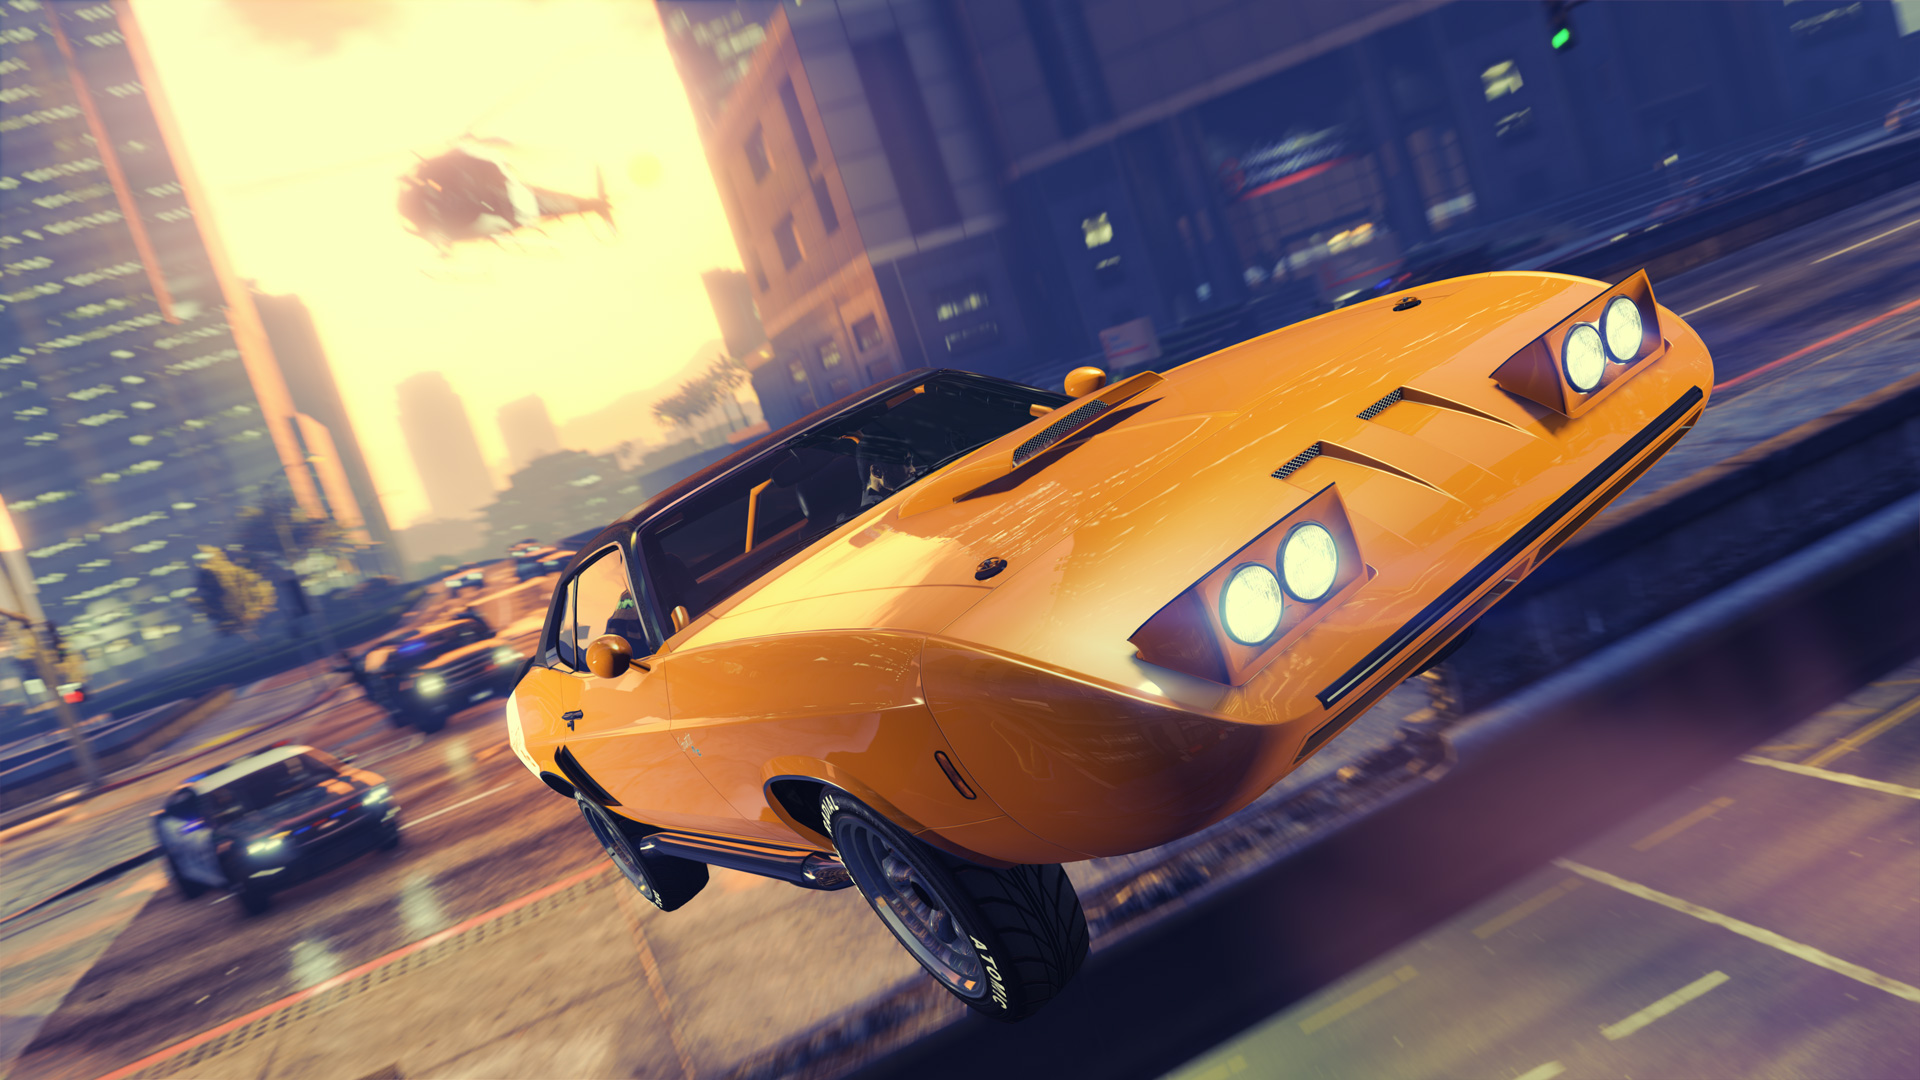 Illinois politician wants to ban Grand Theft Auto after an increase in car thefts in Chicago